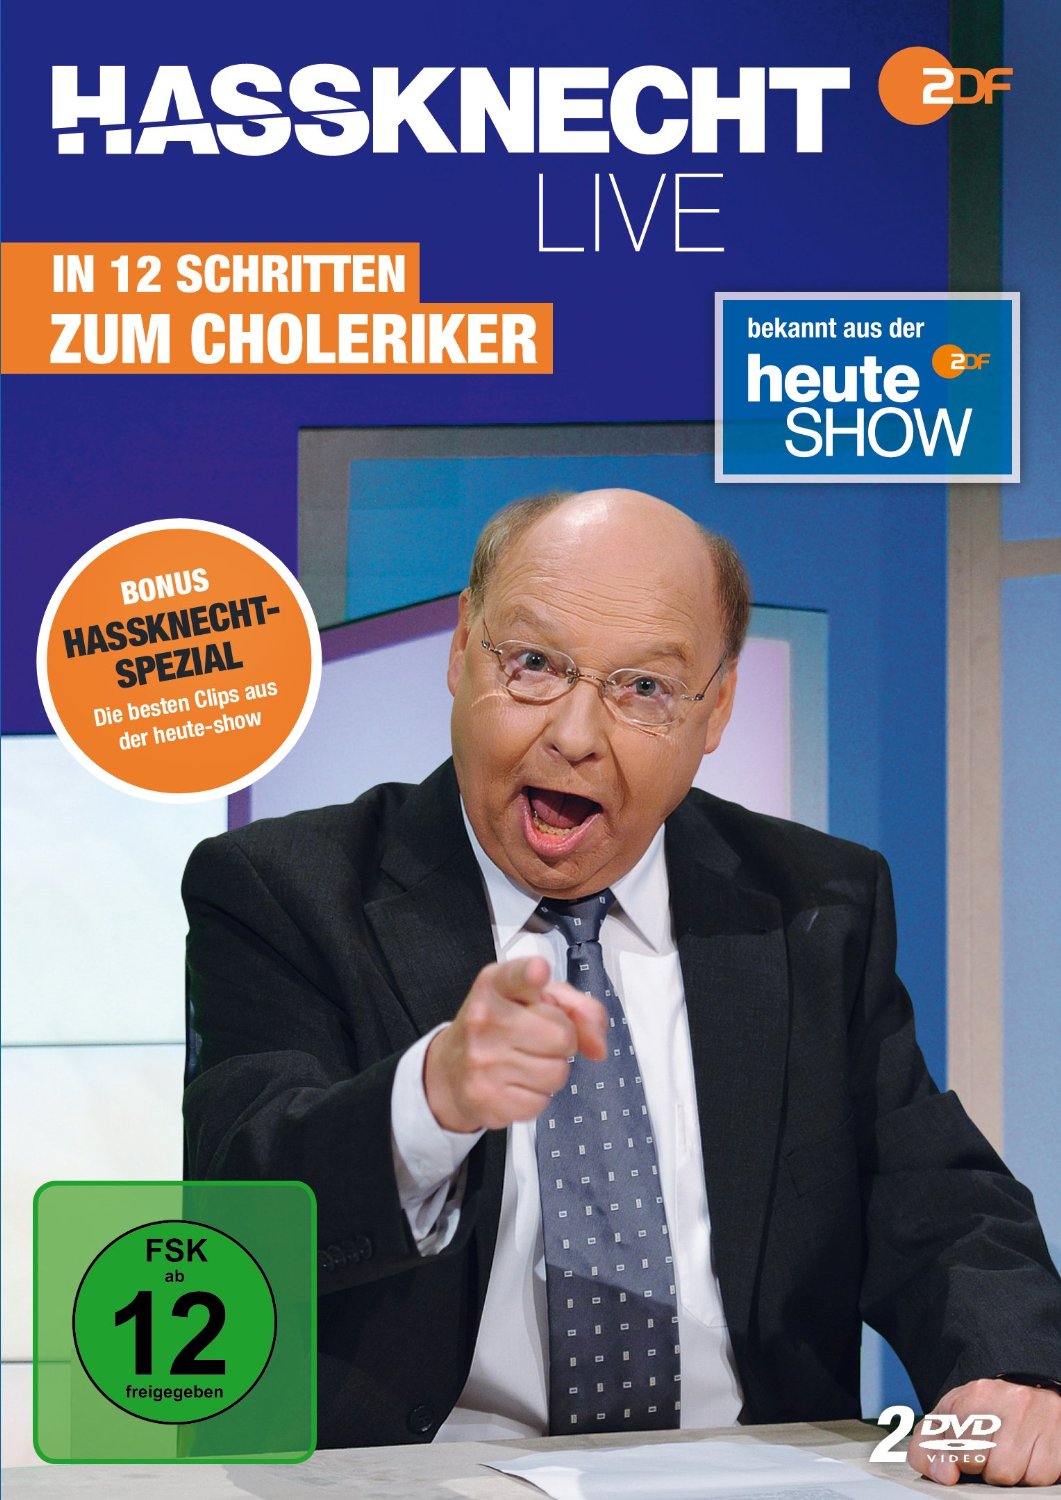 Hassknecht live – DVD-Review